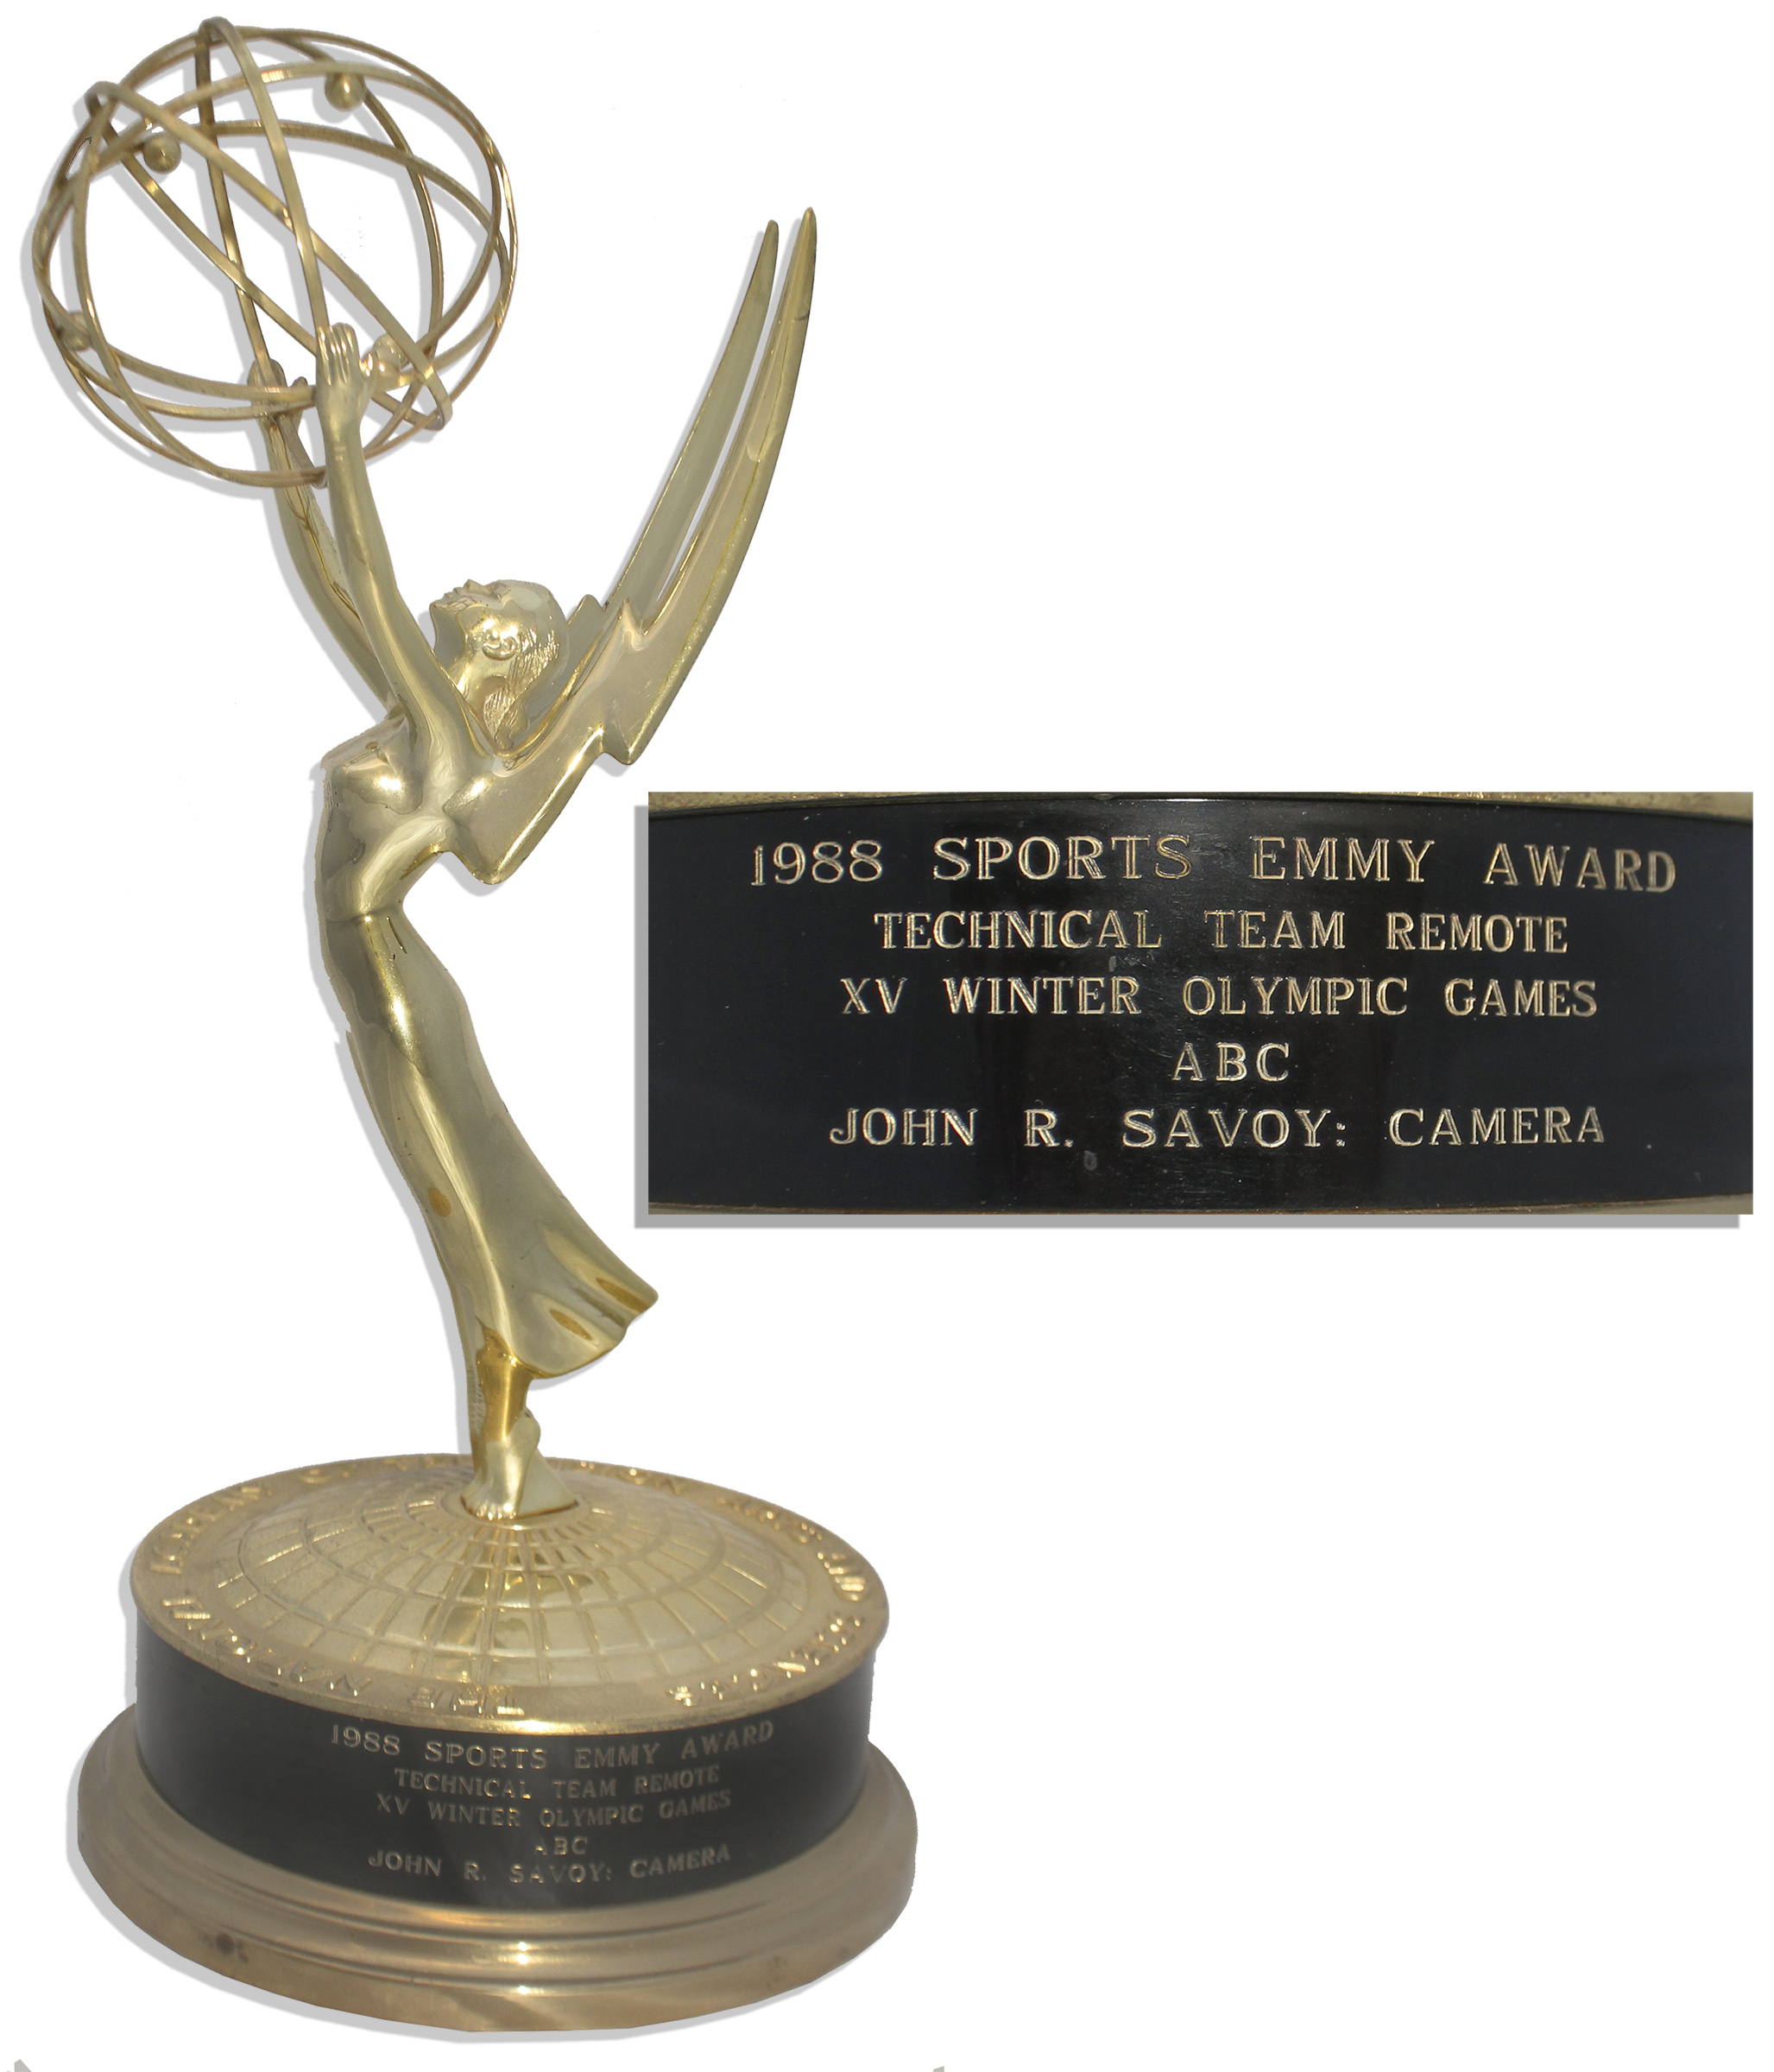 Emmy Award From the 1988 Winter Olympics Brilliant Emmy Award, presented at the 1988 Sports Emmy